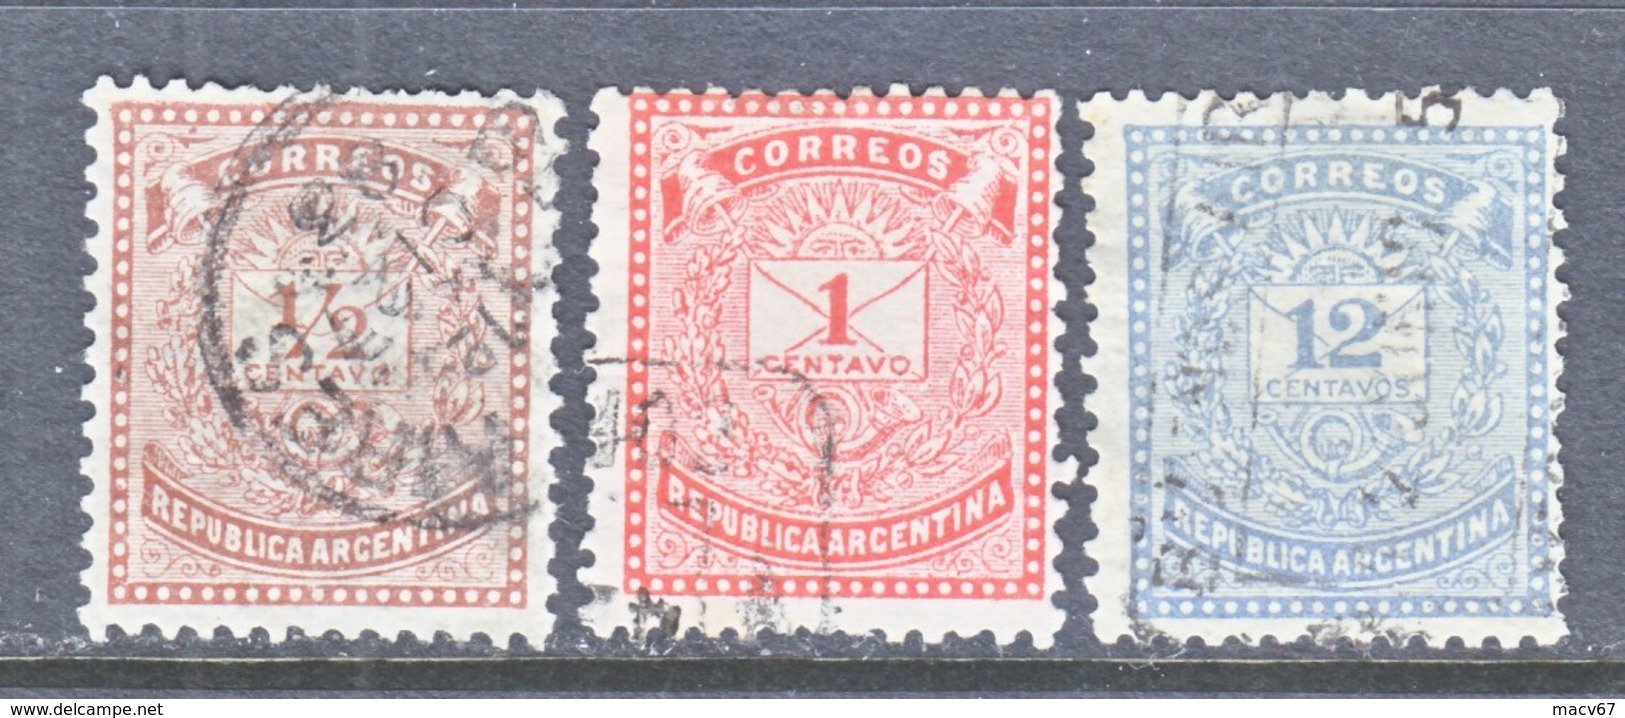 ARGENTINA  43-5   (o)  1882  Issue - Used Stamps